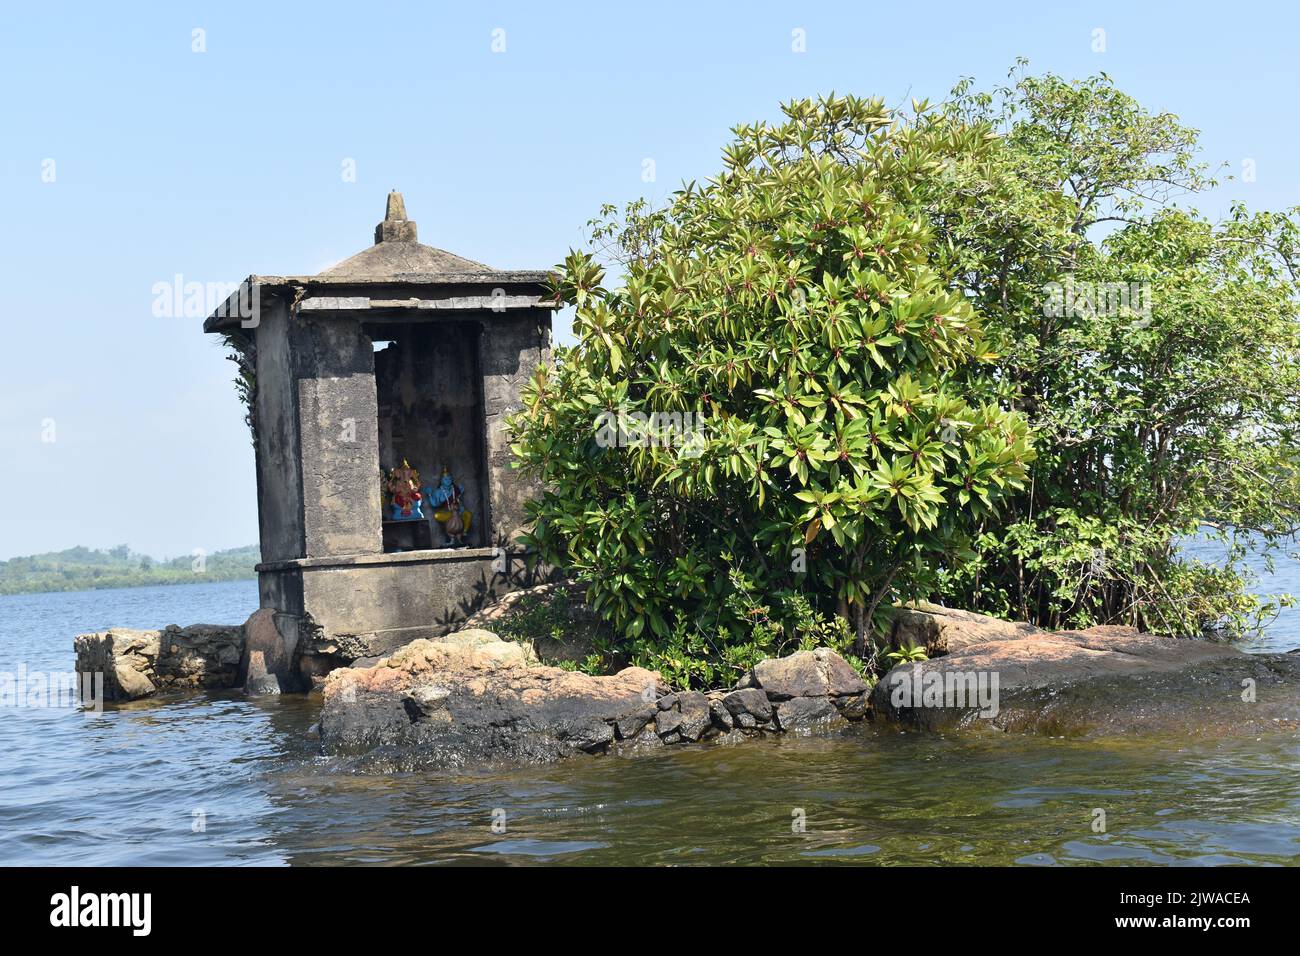 The smallest islet in Madu Ganga Lake is called “Satha Paha Doowa”. “Paha” translates to “five”, whereas “Satha” means “cent”. According to local tradition, the islet had once been purchased for five cents. But others say, it got its name due to the shape or small size which resembles just a small coin. Nontheless Fice-Cent-Island is big enough to carry a temple. The shrine is dedicated to Kataragama, a deity revered by Sinhalese Buddhists and Tamil Hindus and Weddah animists alike. In a way, it’s a Devale, a Buddhist shrine for a Hindu deity. Sri Lanka. Stock Photo